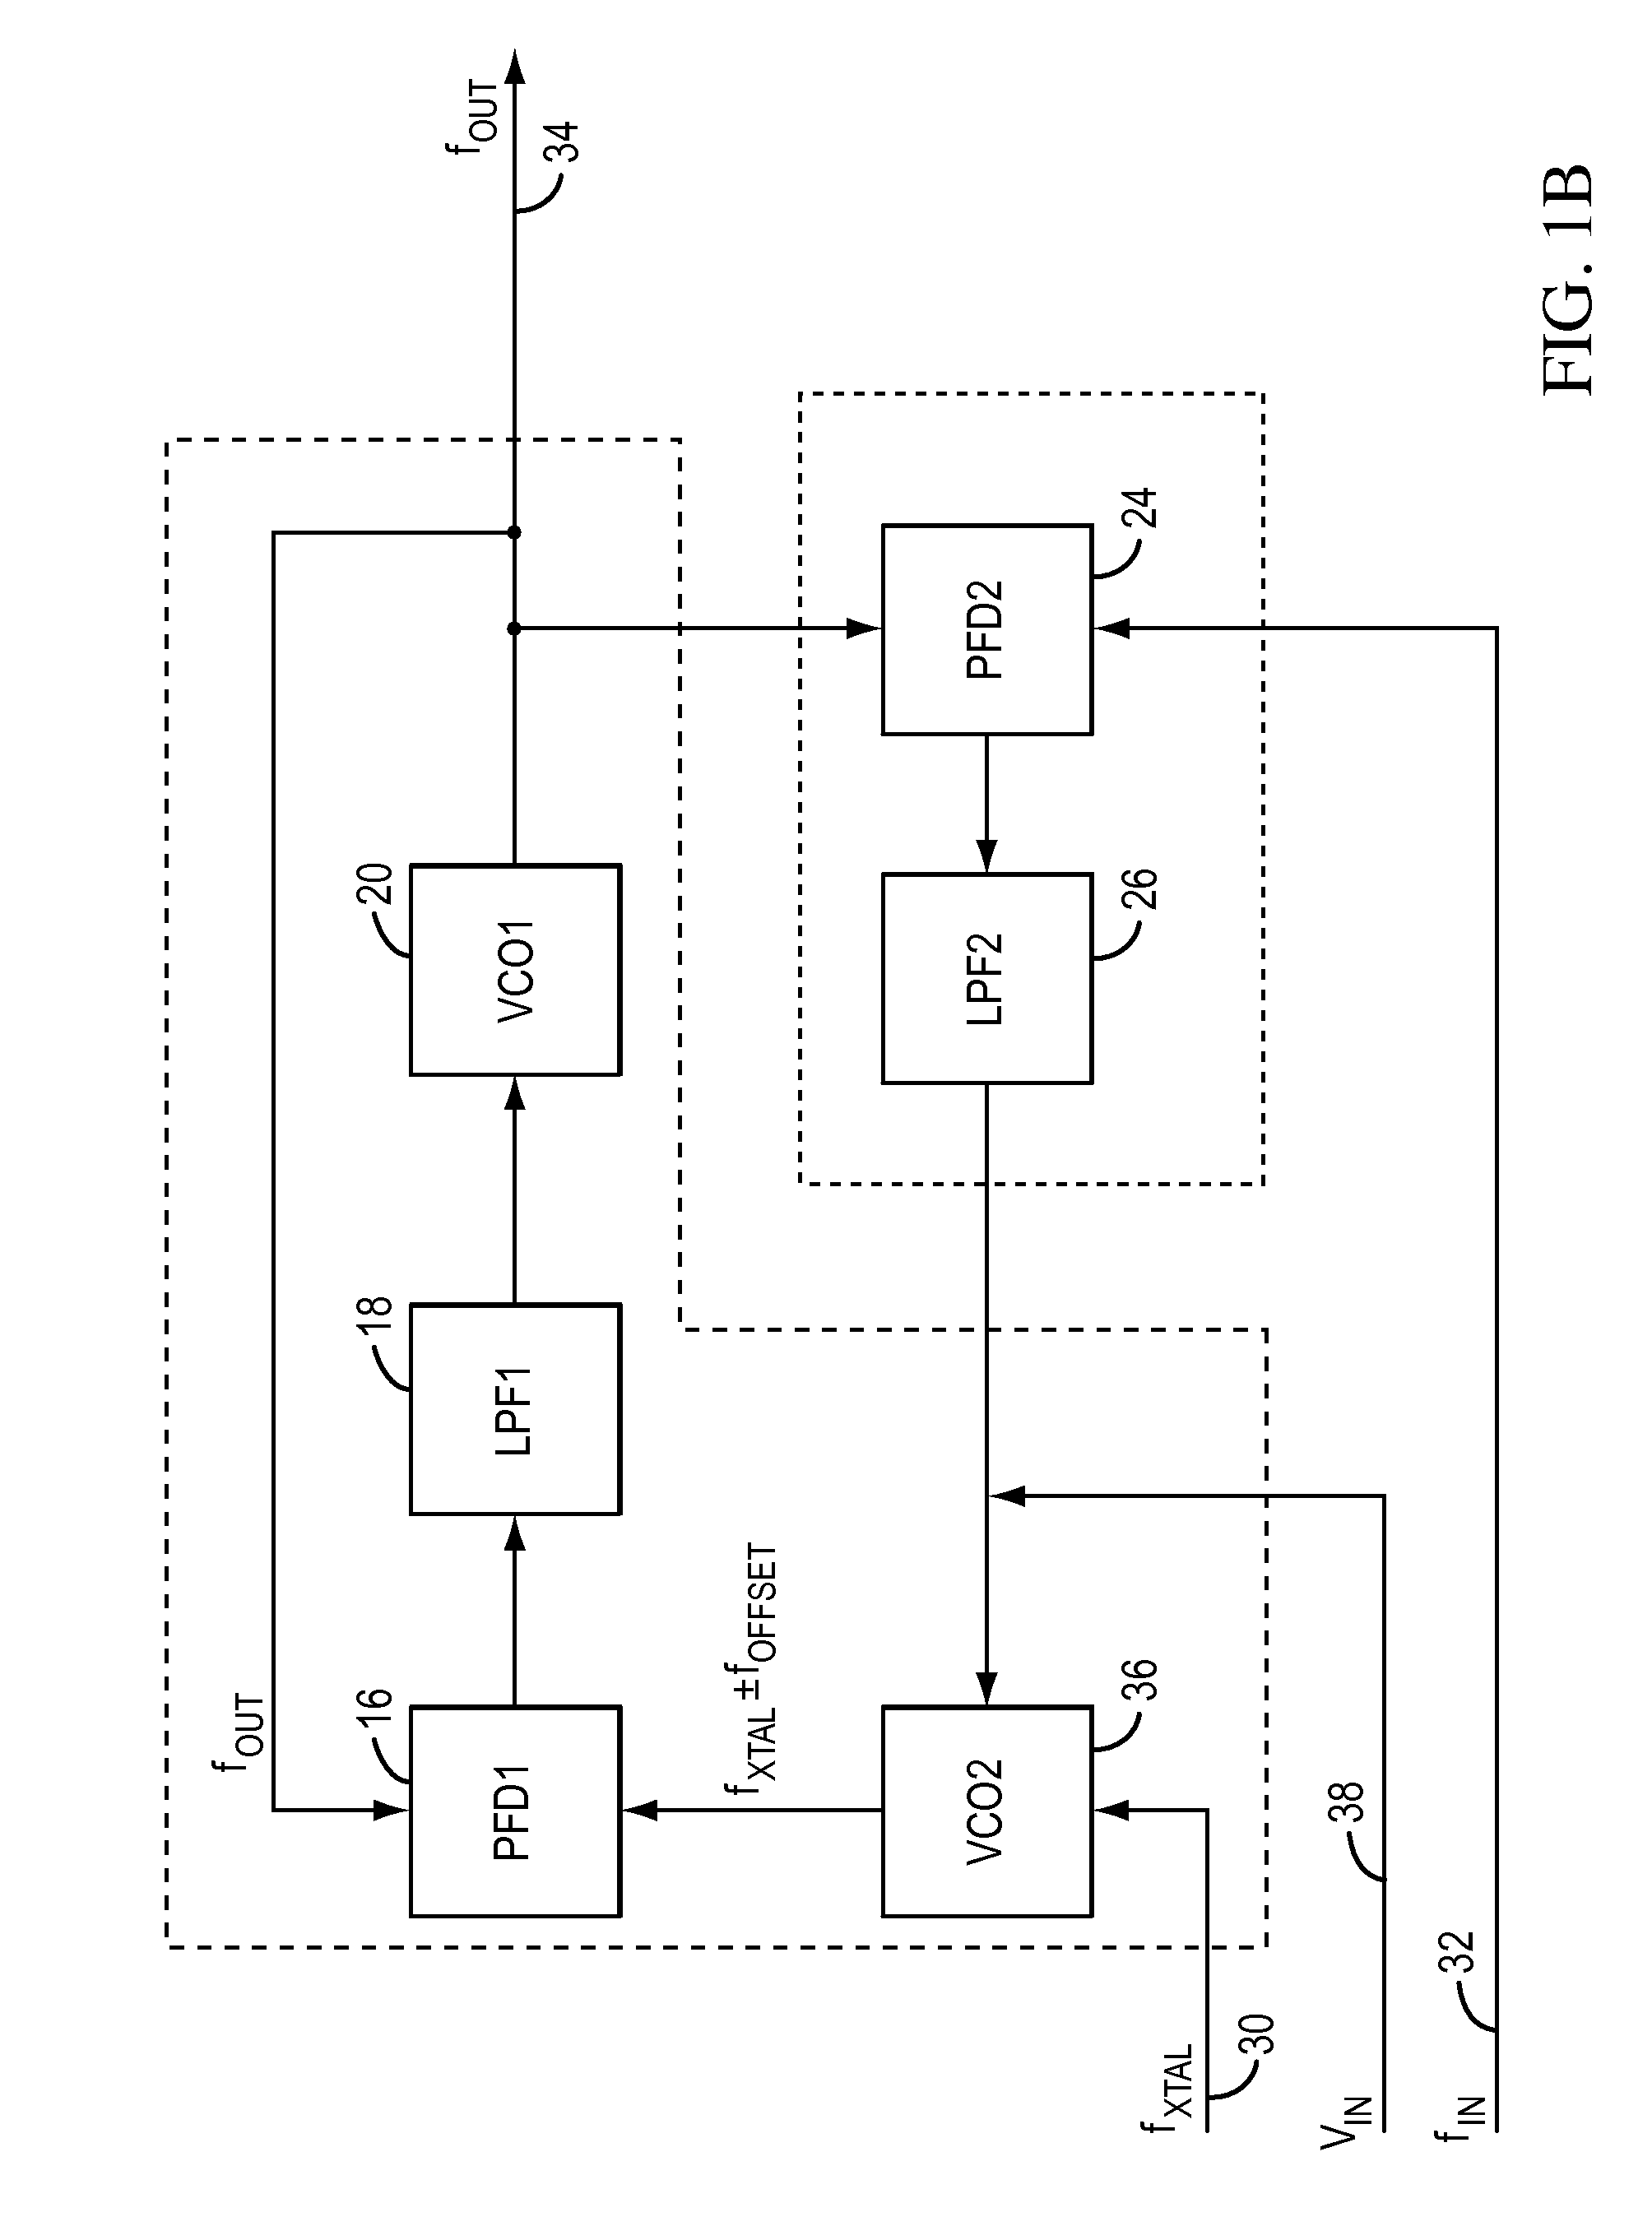 Dual PLL loop for phase noise filtering